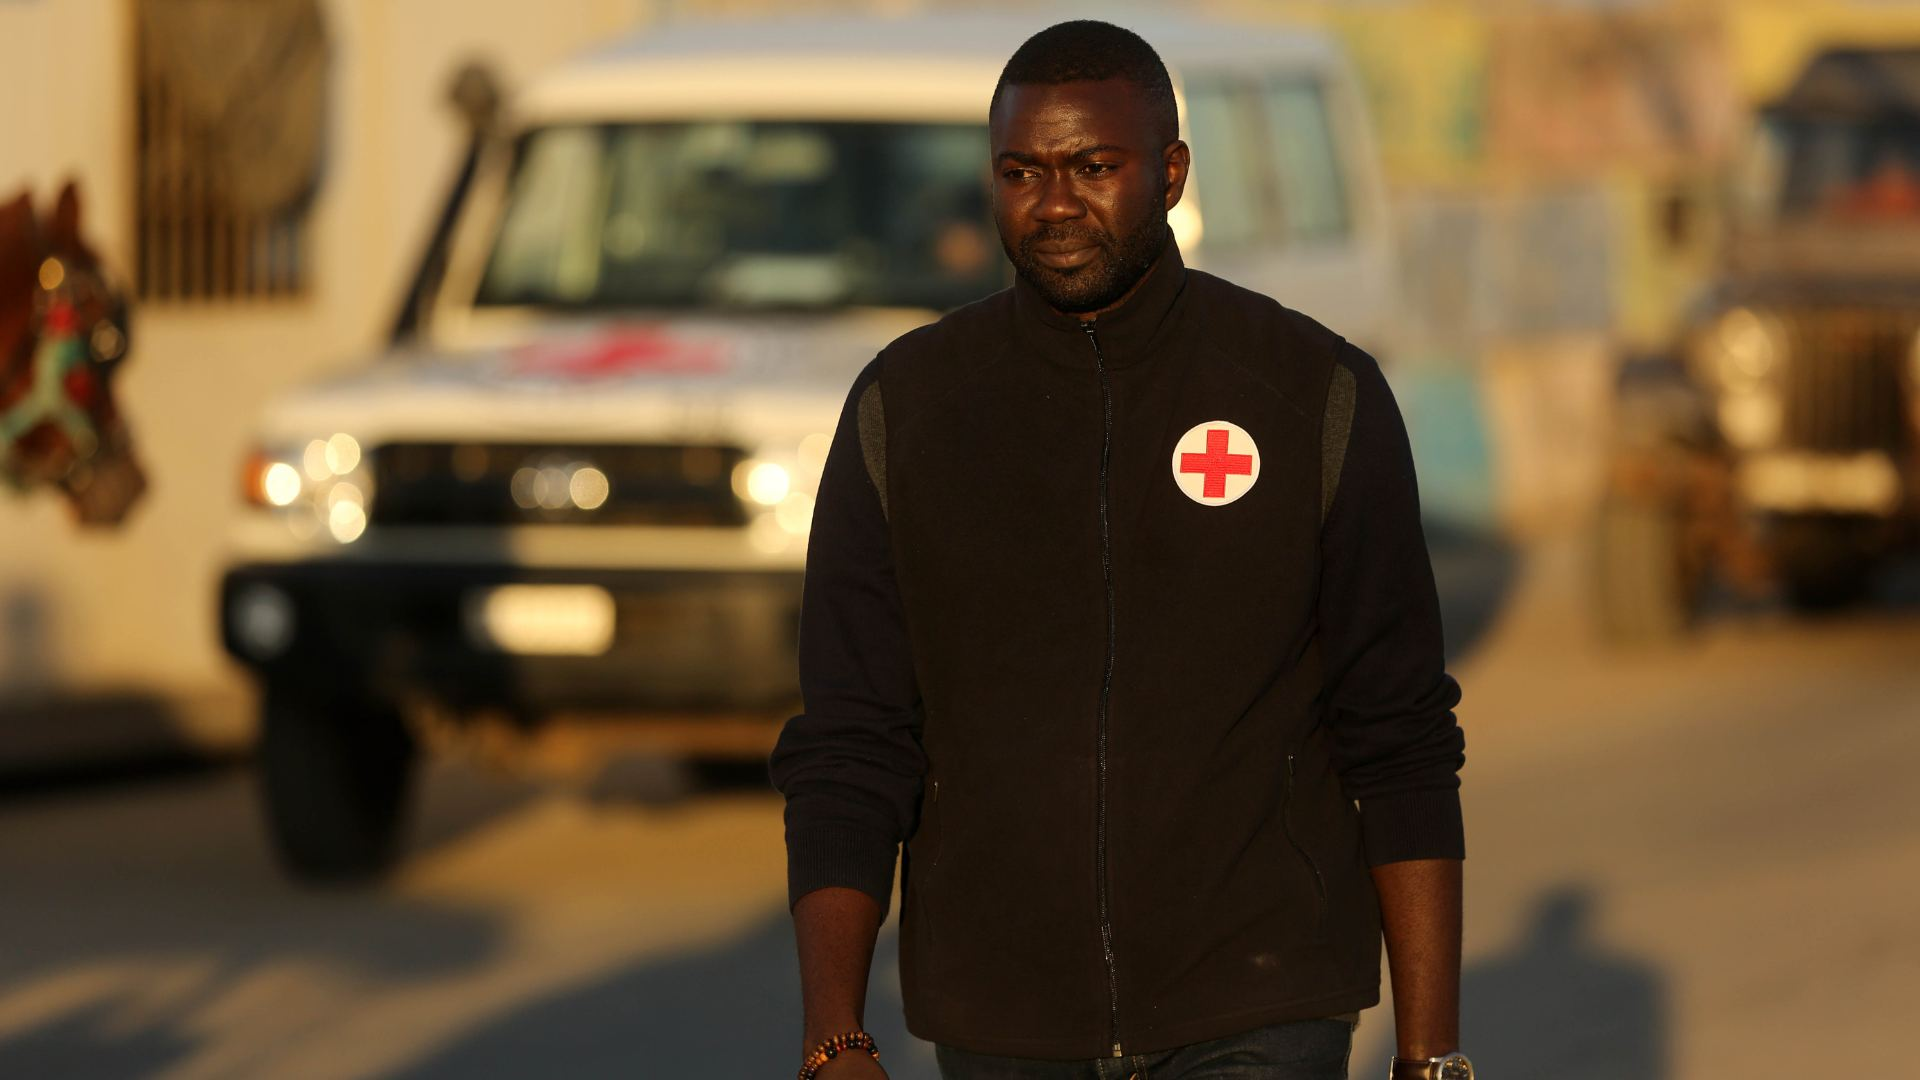 Red Cross's Mamadou Sow: 'I wish we could shield hospitals in Gaza'